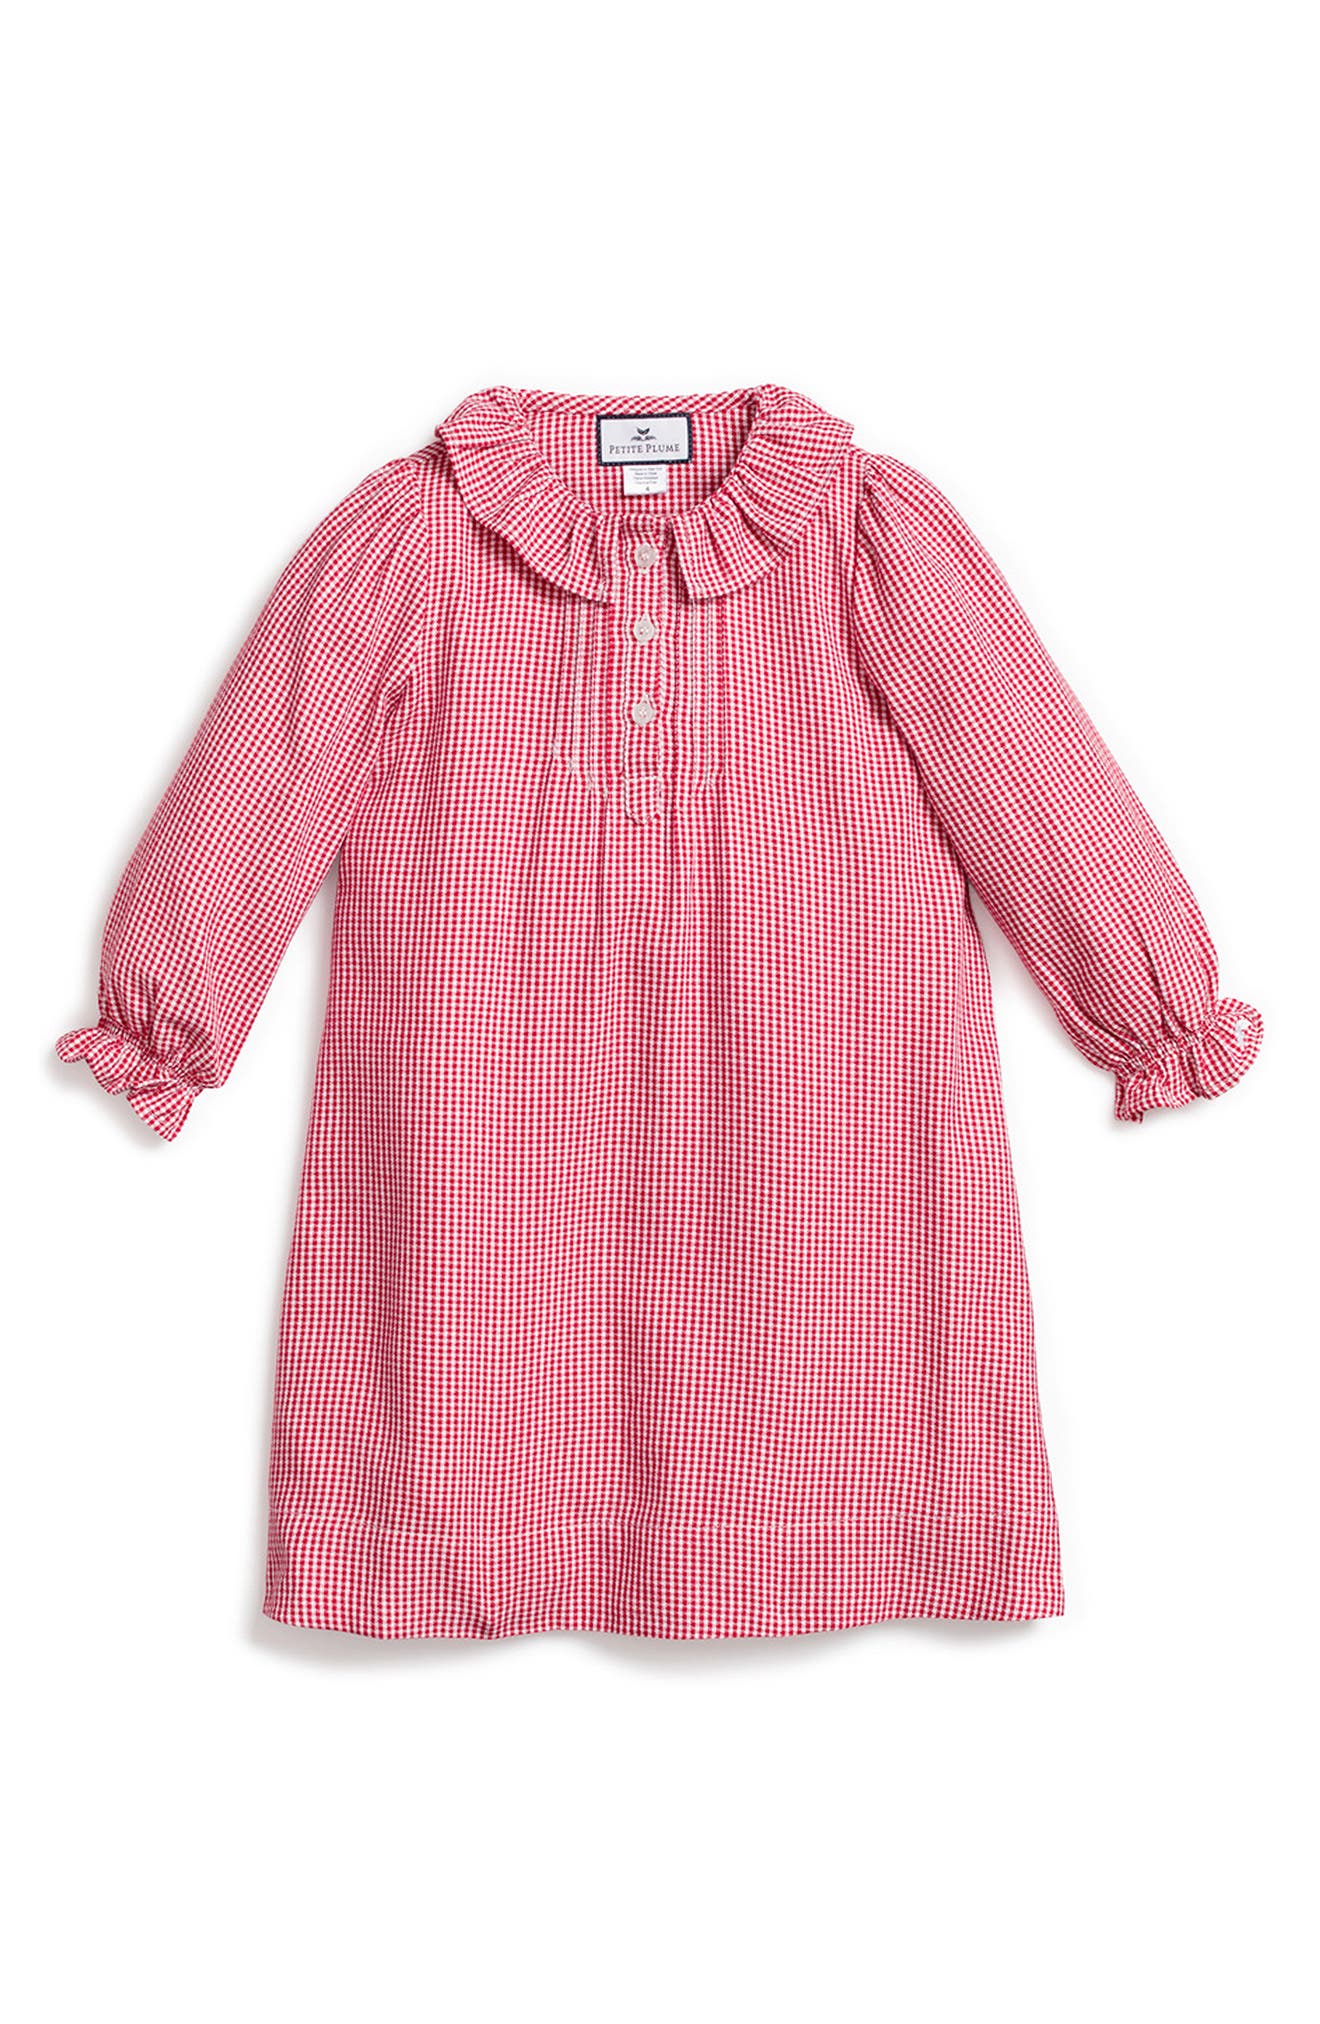 1940s Children’s Clothing: Girls, Boys, Baby, Toddler Petite Plume Kids Gingham Flannel Nightgown Size 5Y in Red at Nordstrom $48.00 AT vintagedancer.com